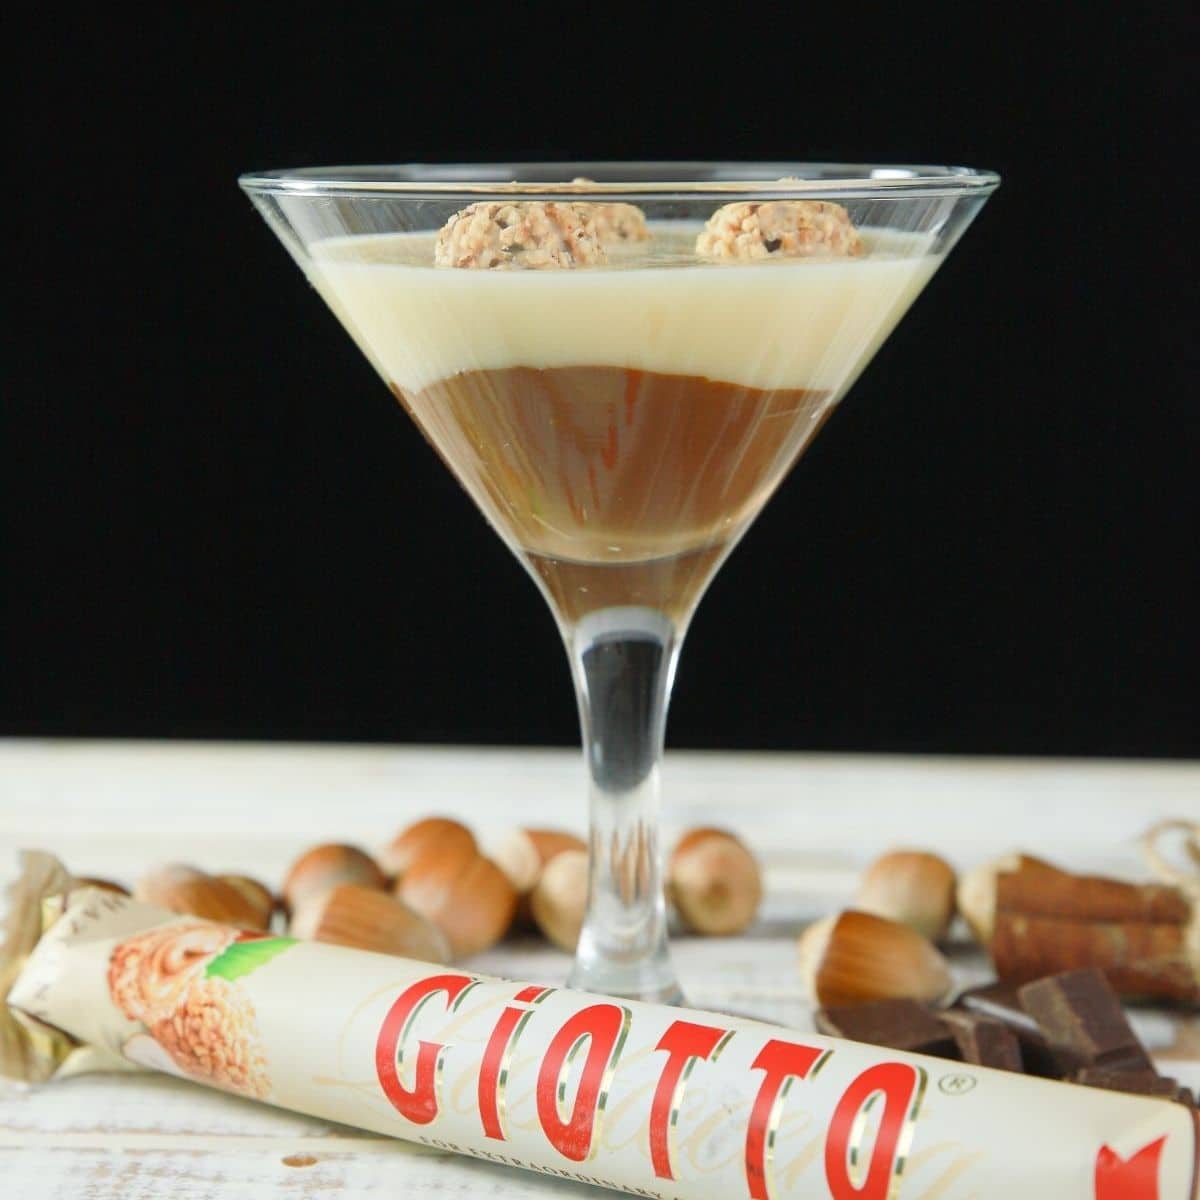 layered kinder joy pudding in martini glass with giotto bar and hazelnuts on white table